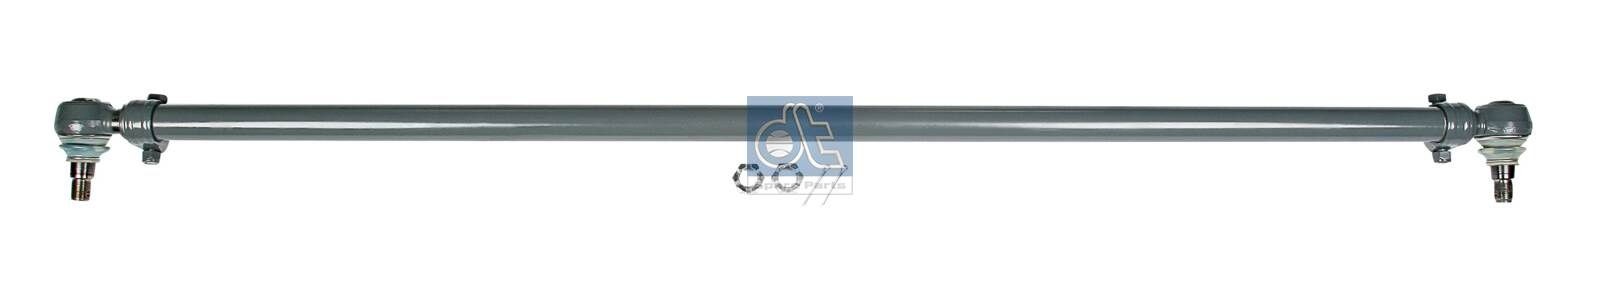 DT Spare Parts 7.30008 Rod Assembly 500 307 556